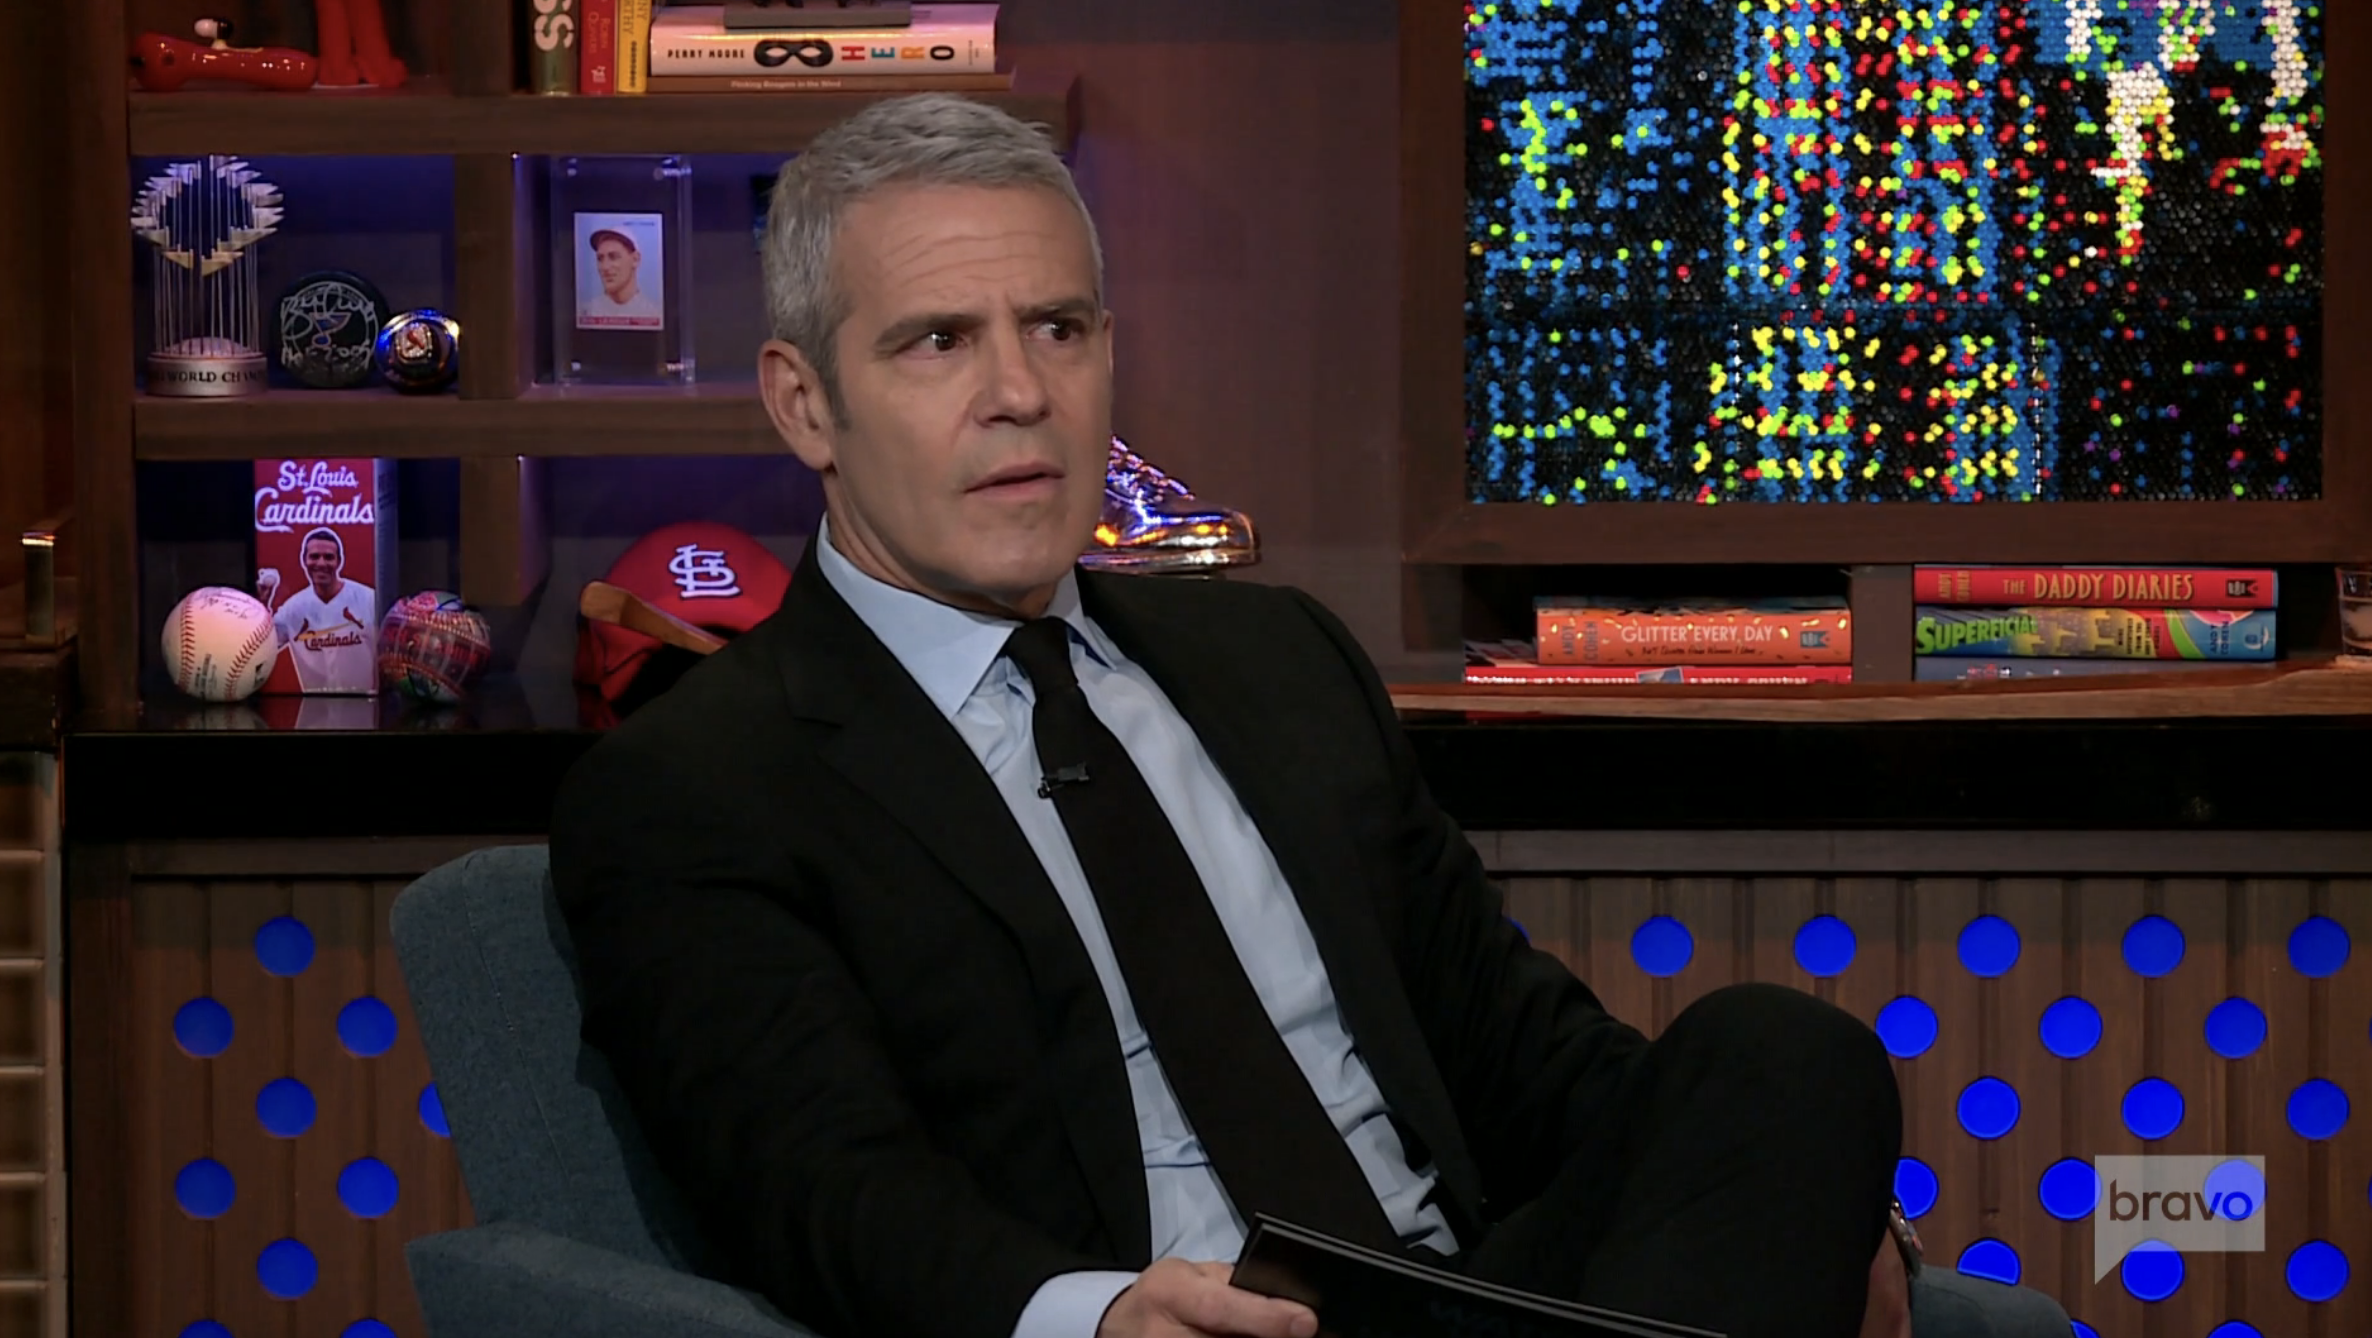 Andy Cohen on WWHL